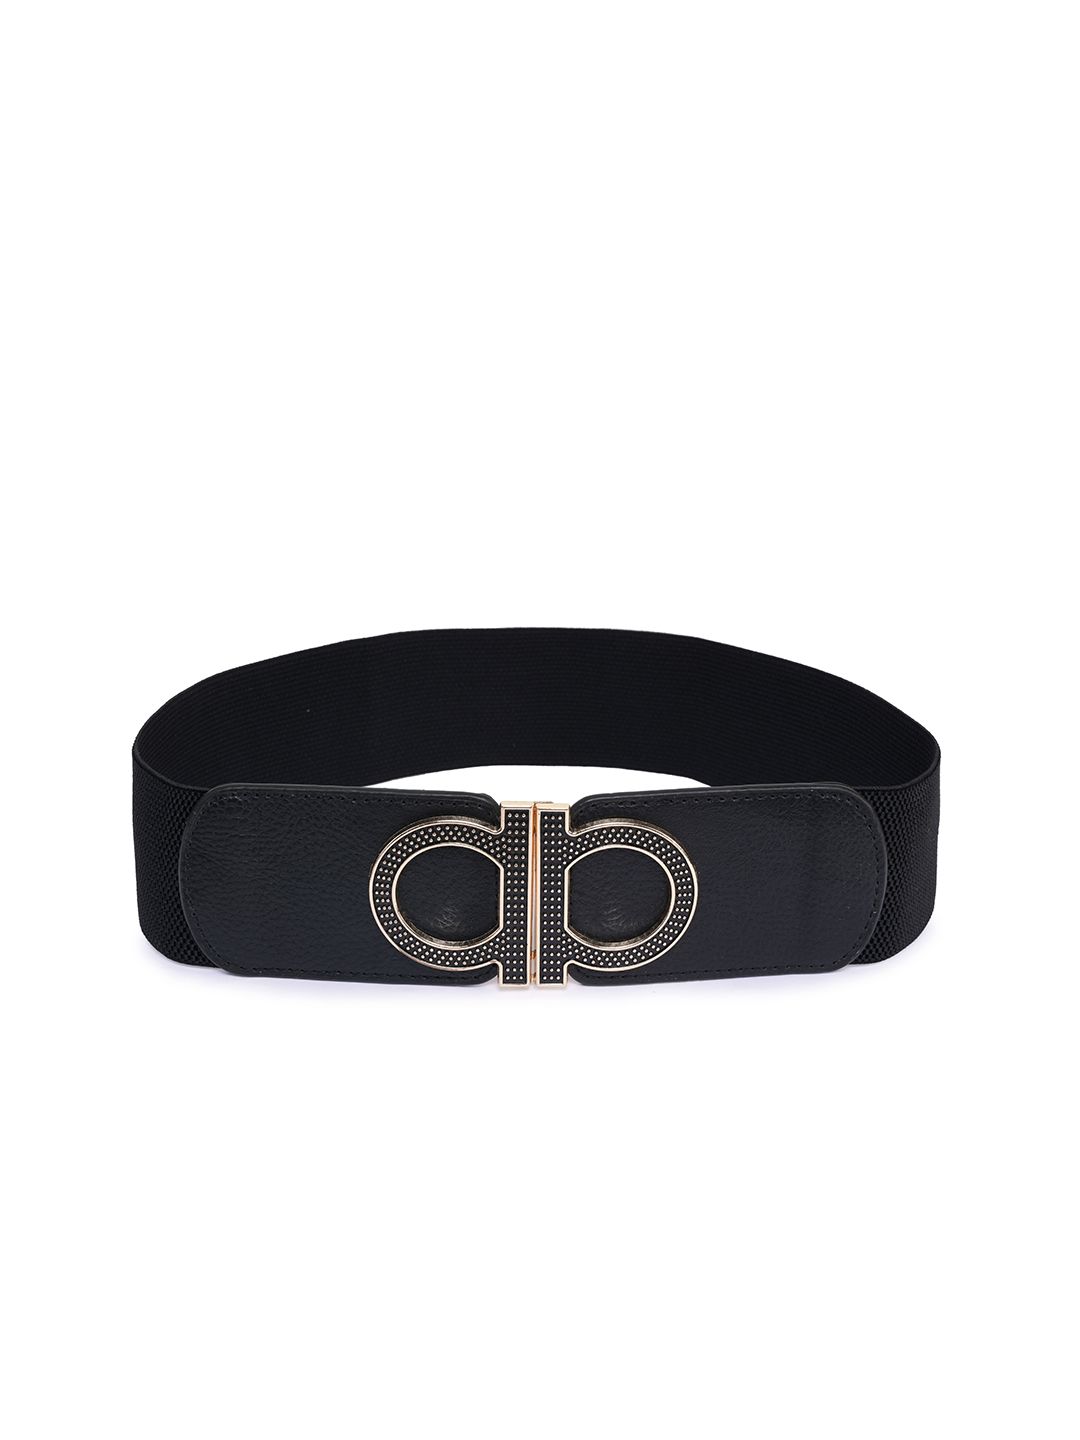 BuckleUp Women Black Solid Stretchable Belt Price in India